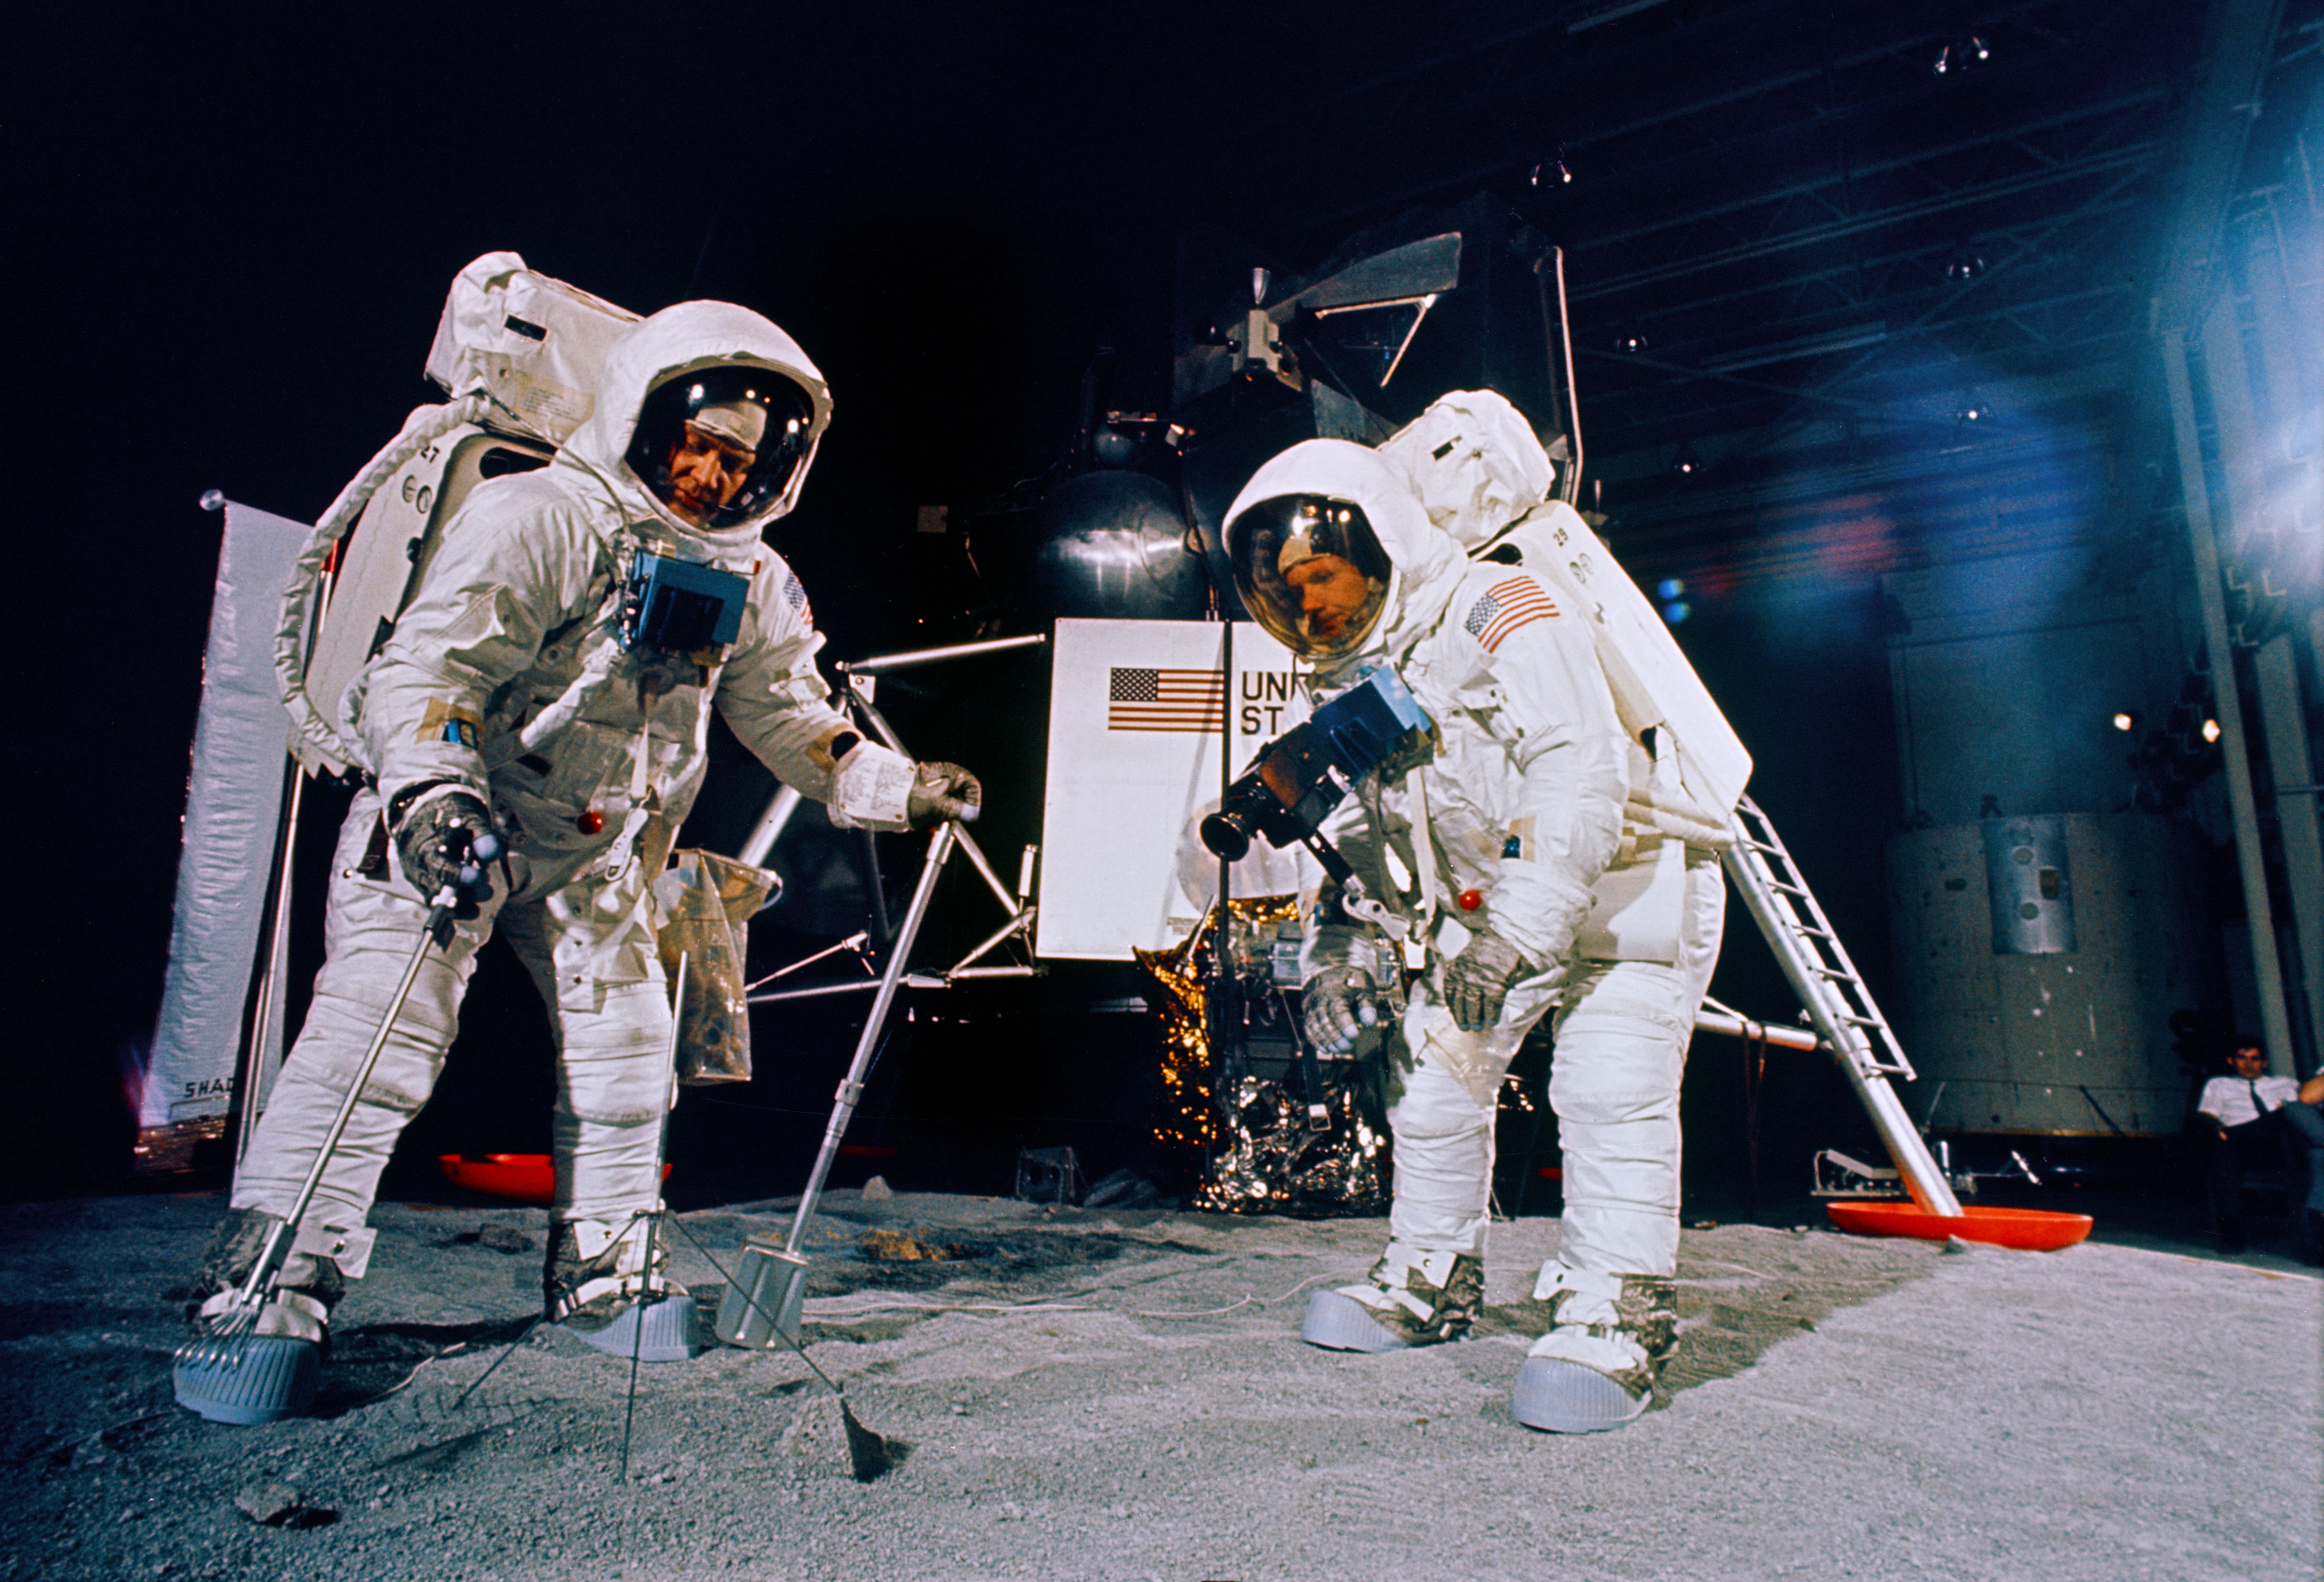 55 Years Ago: One Month Until the Moon Landing - NASA